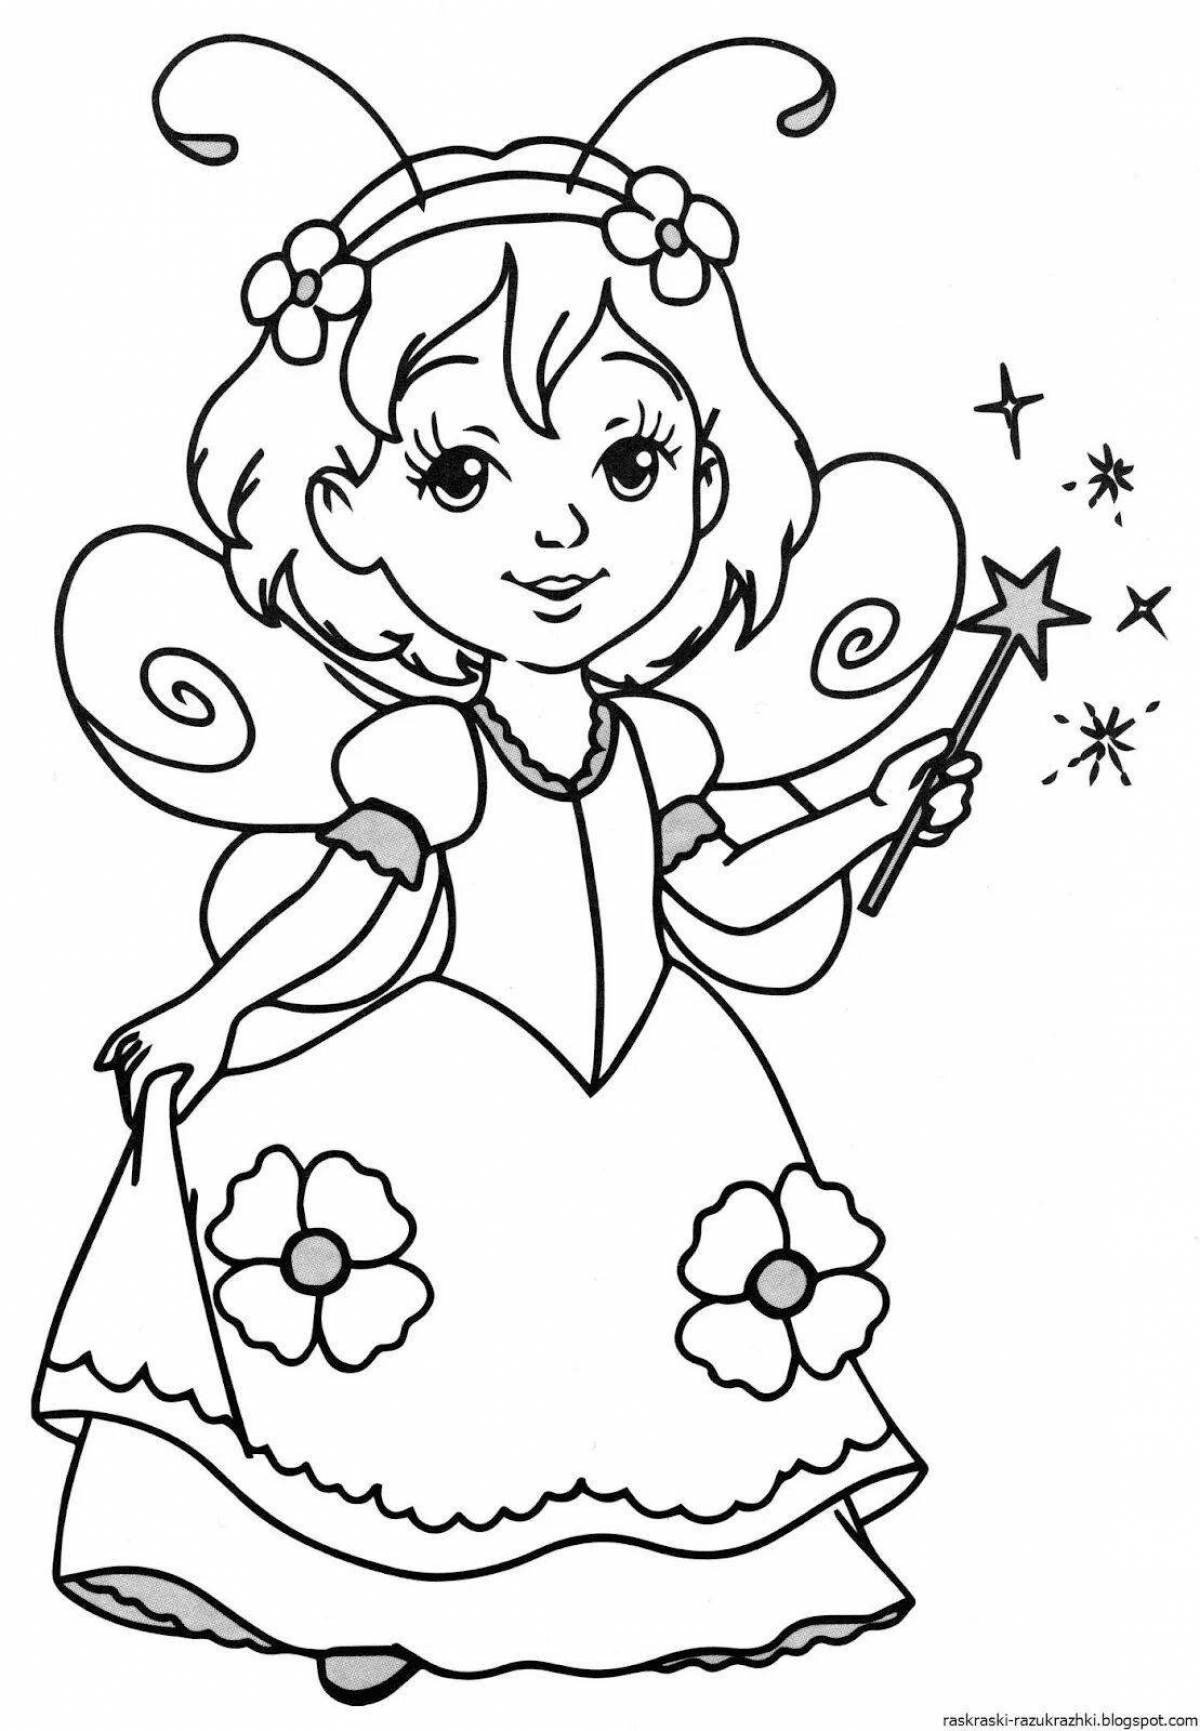 Princess coloring book for girls 3-4 years old